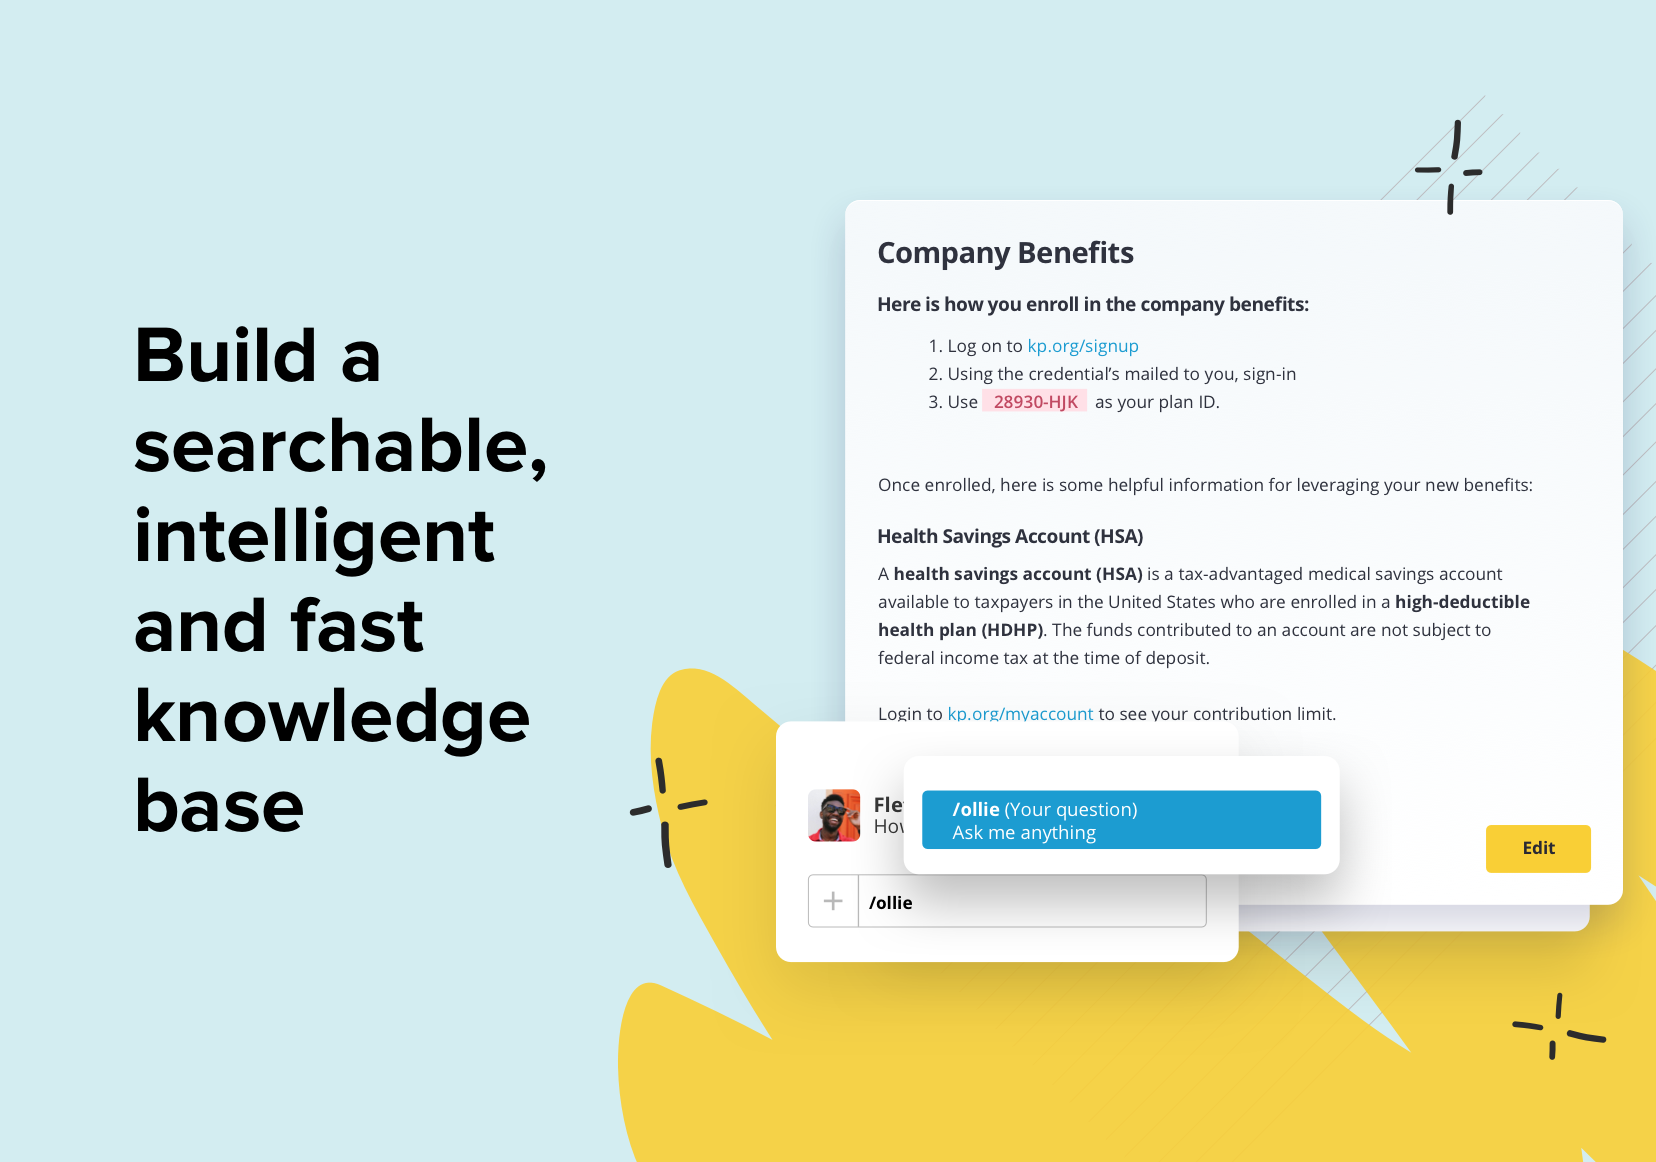 Build a searchable, intelligent and fast knowledge base.